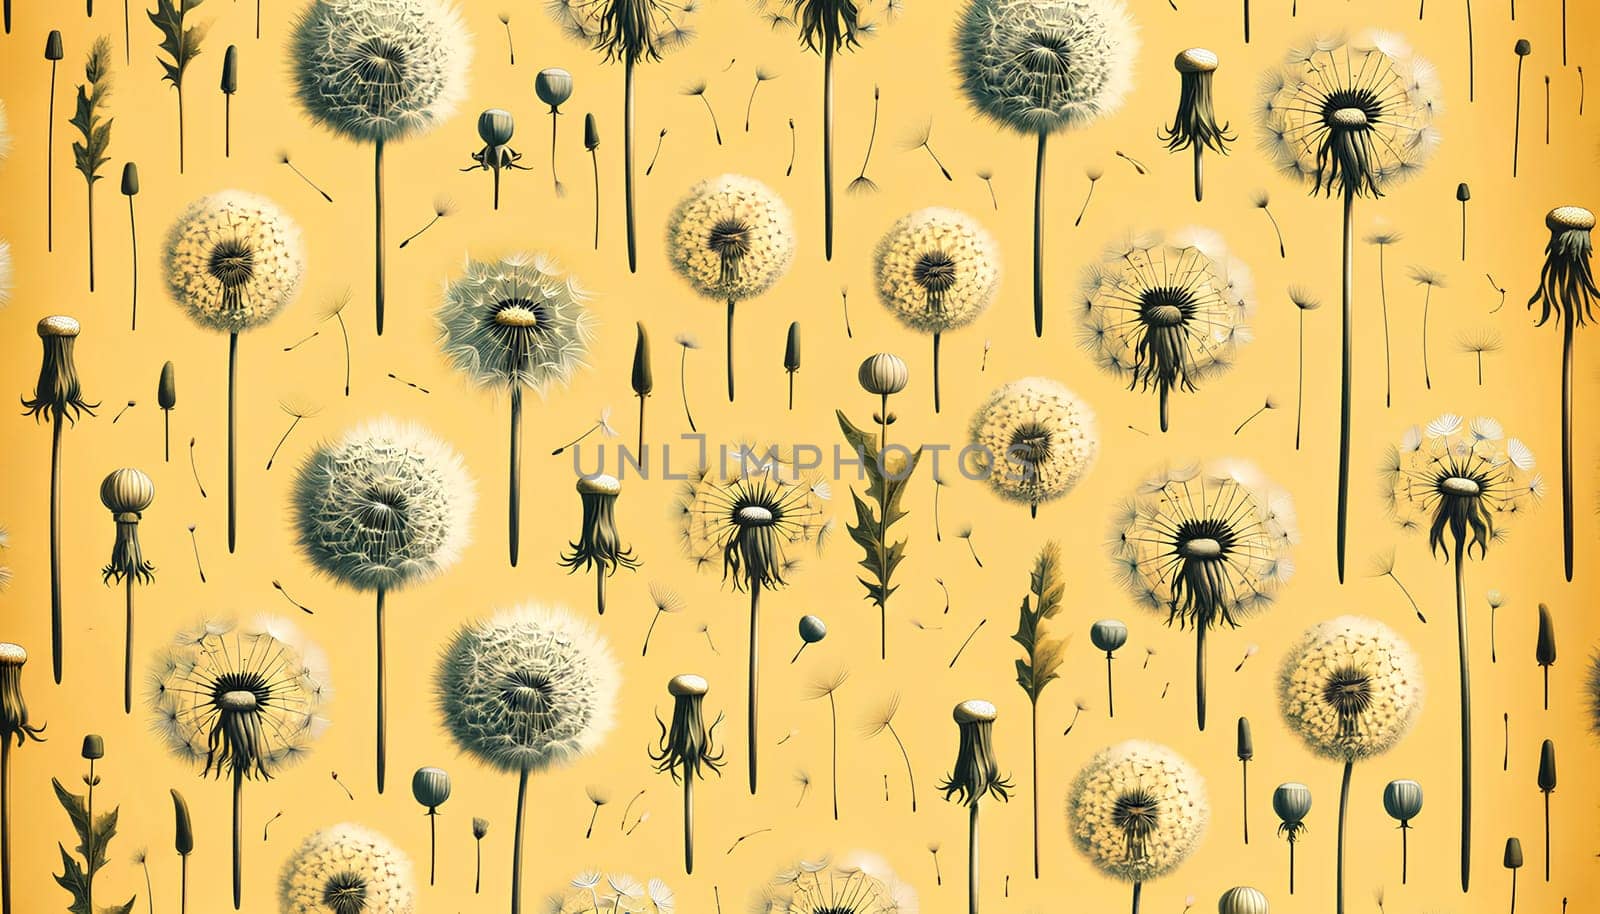 Vintage horizontal pattern of dandelions on a yellow background by Annado